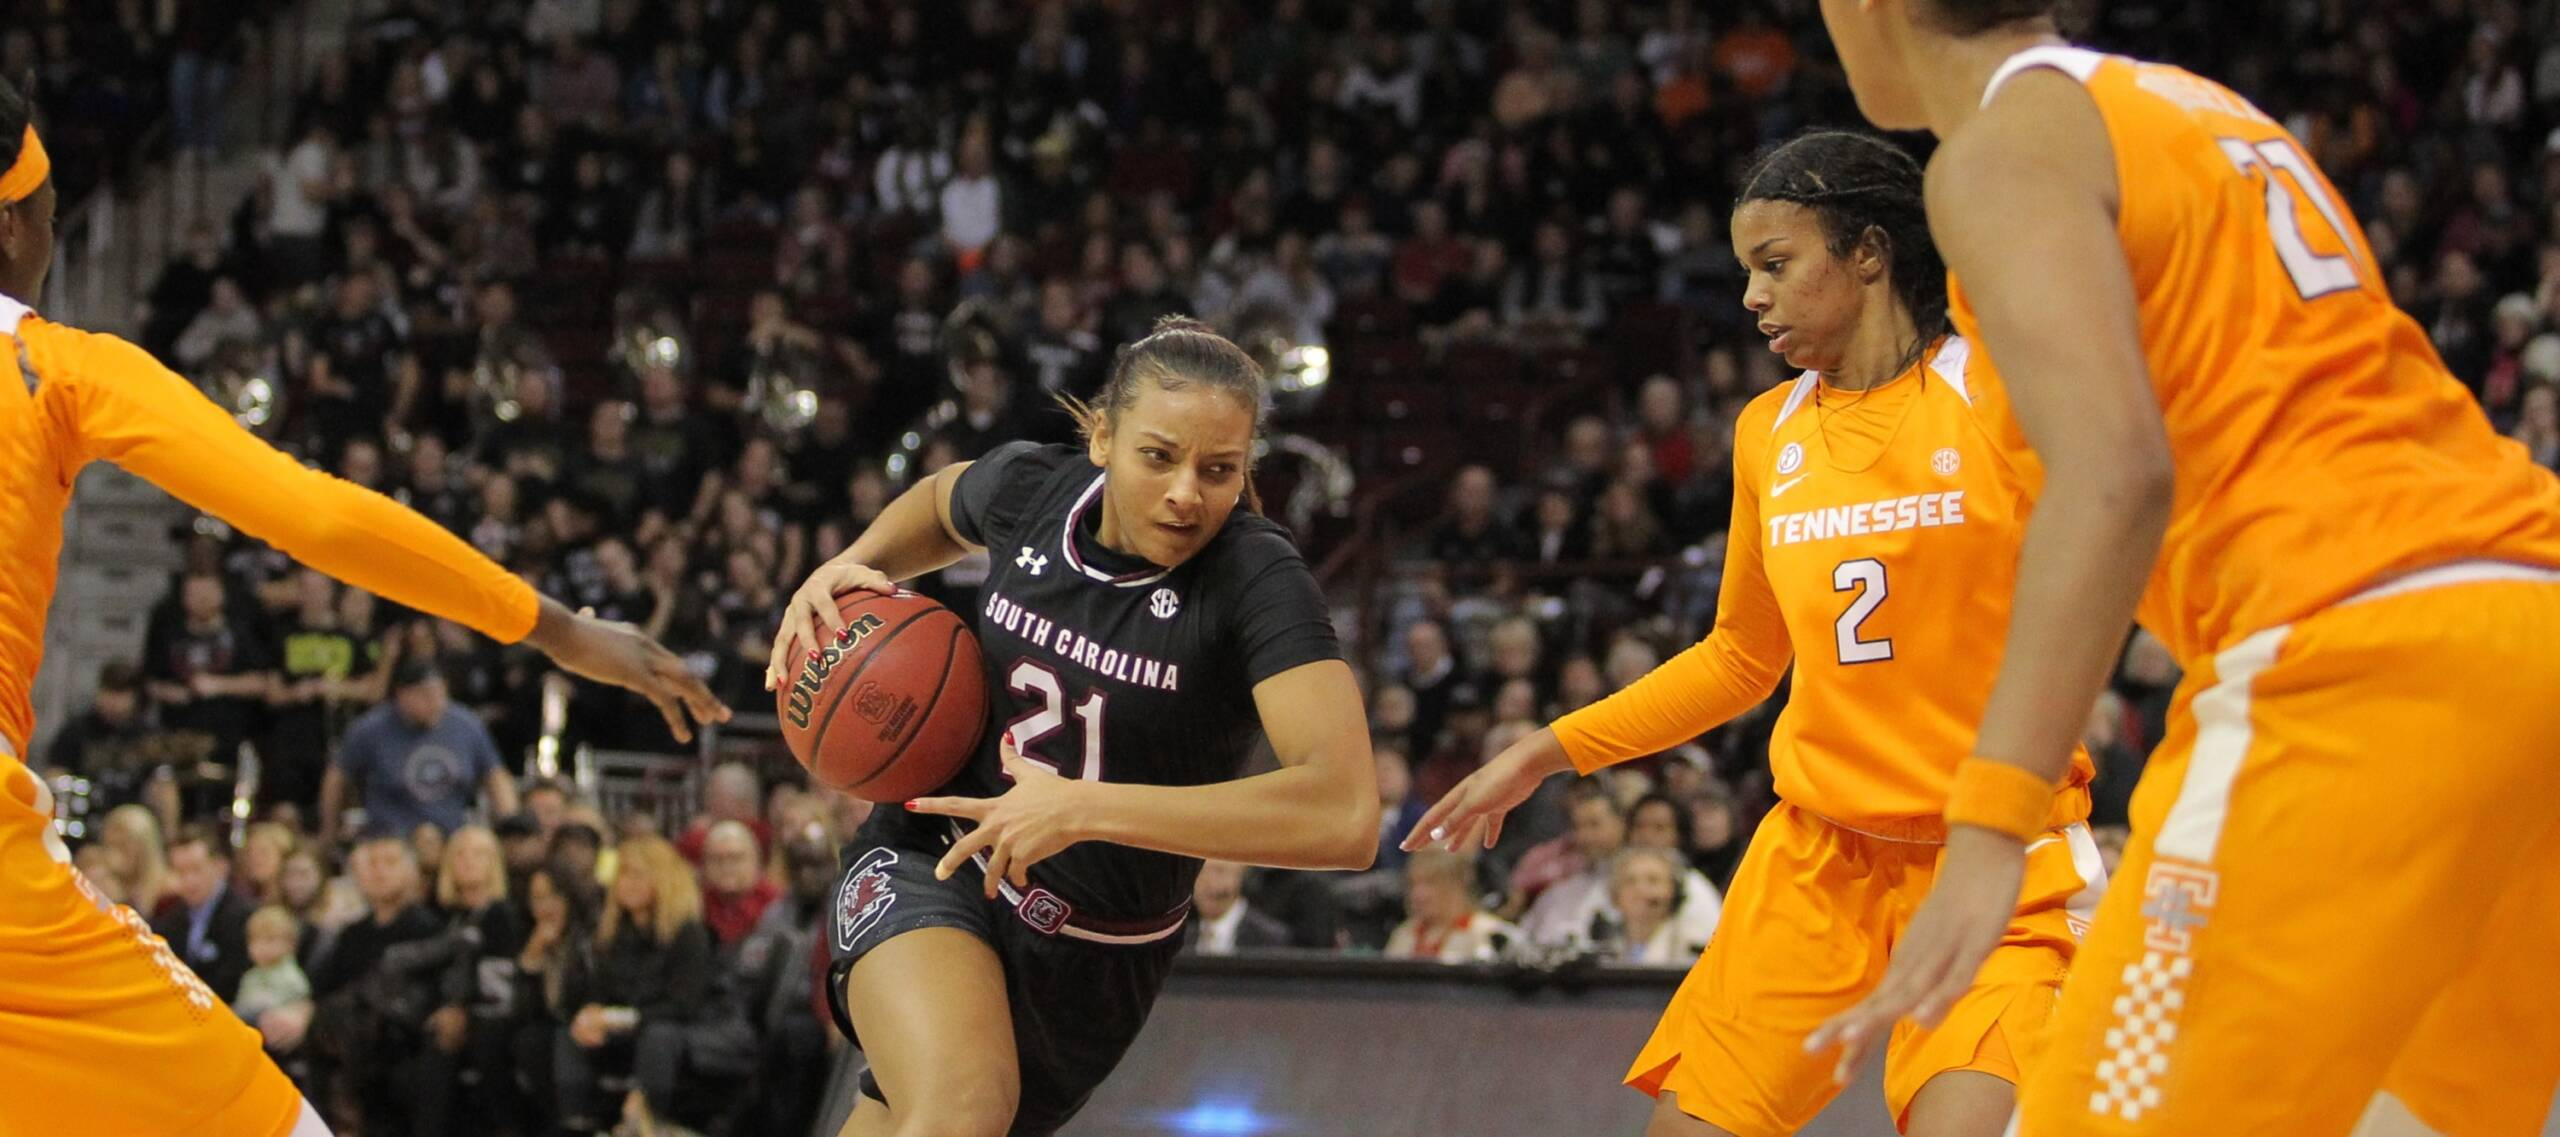 No. 7 Gamecocks Fall To No. 15 Tennessee 65-46 Sunday